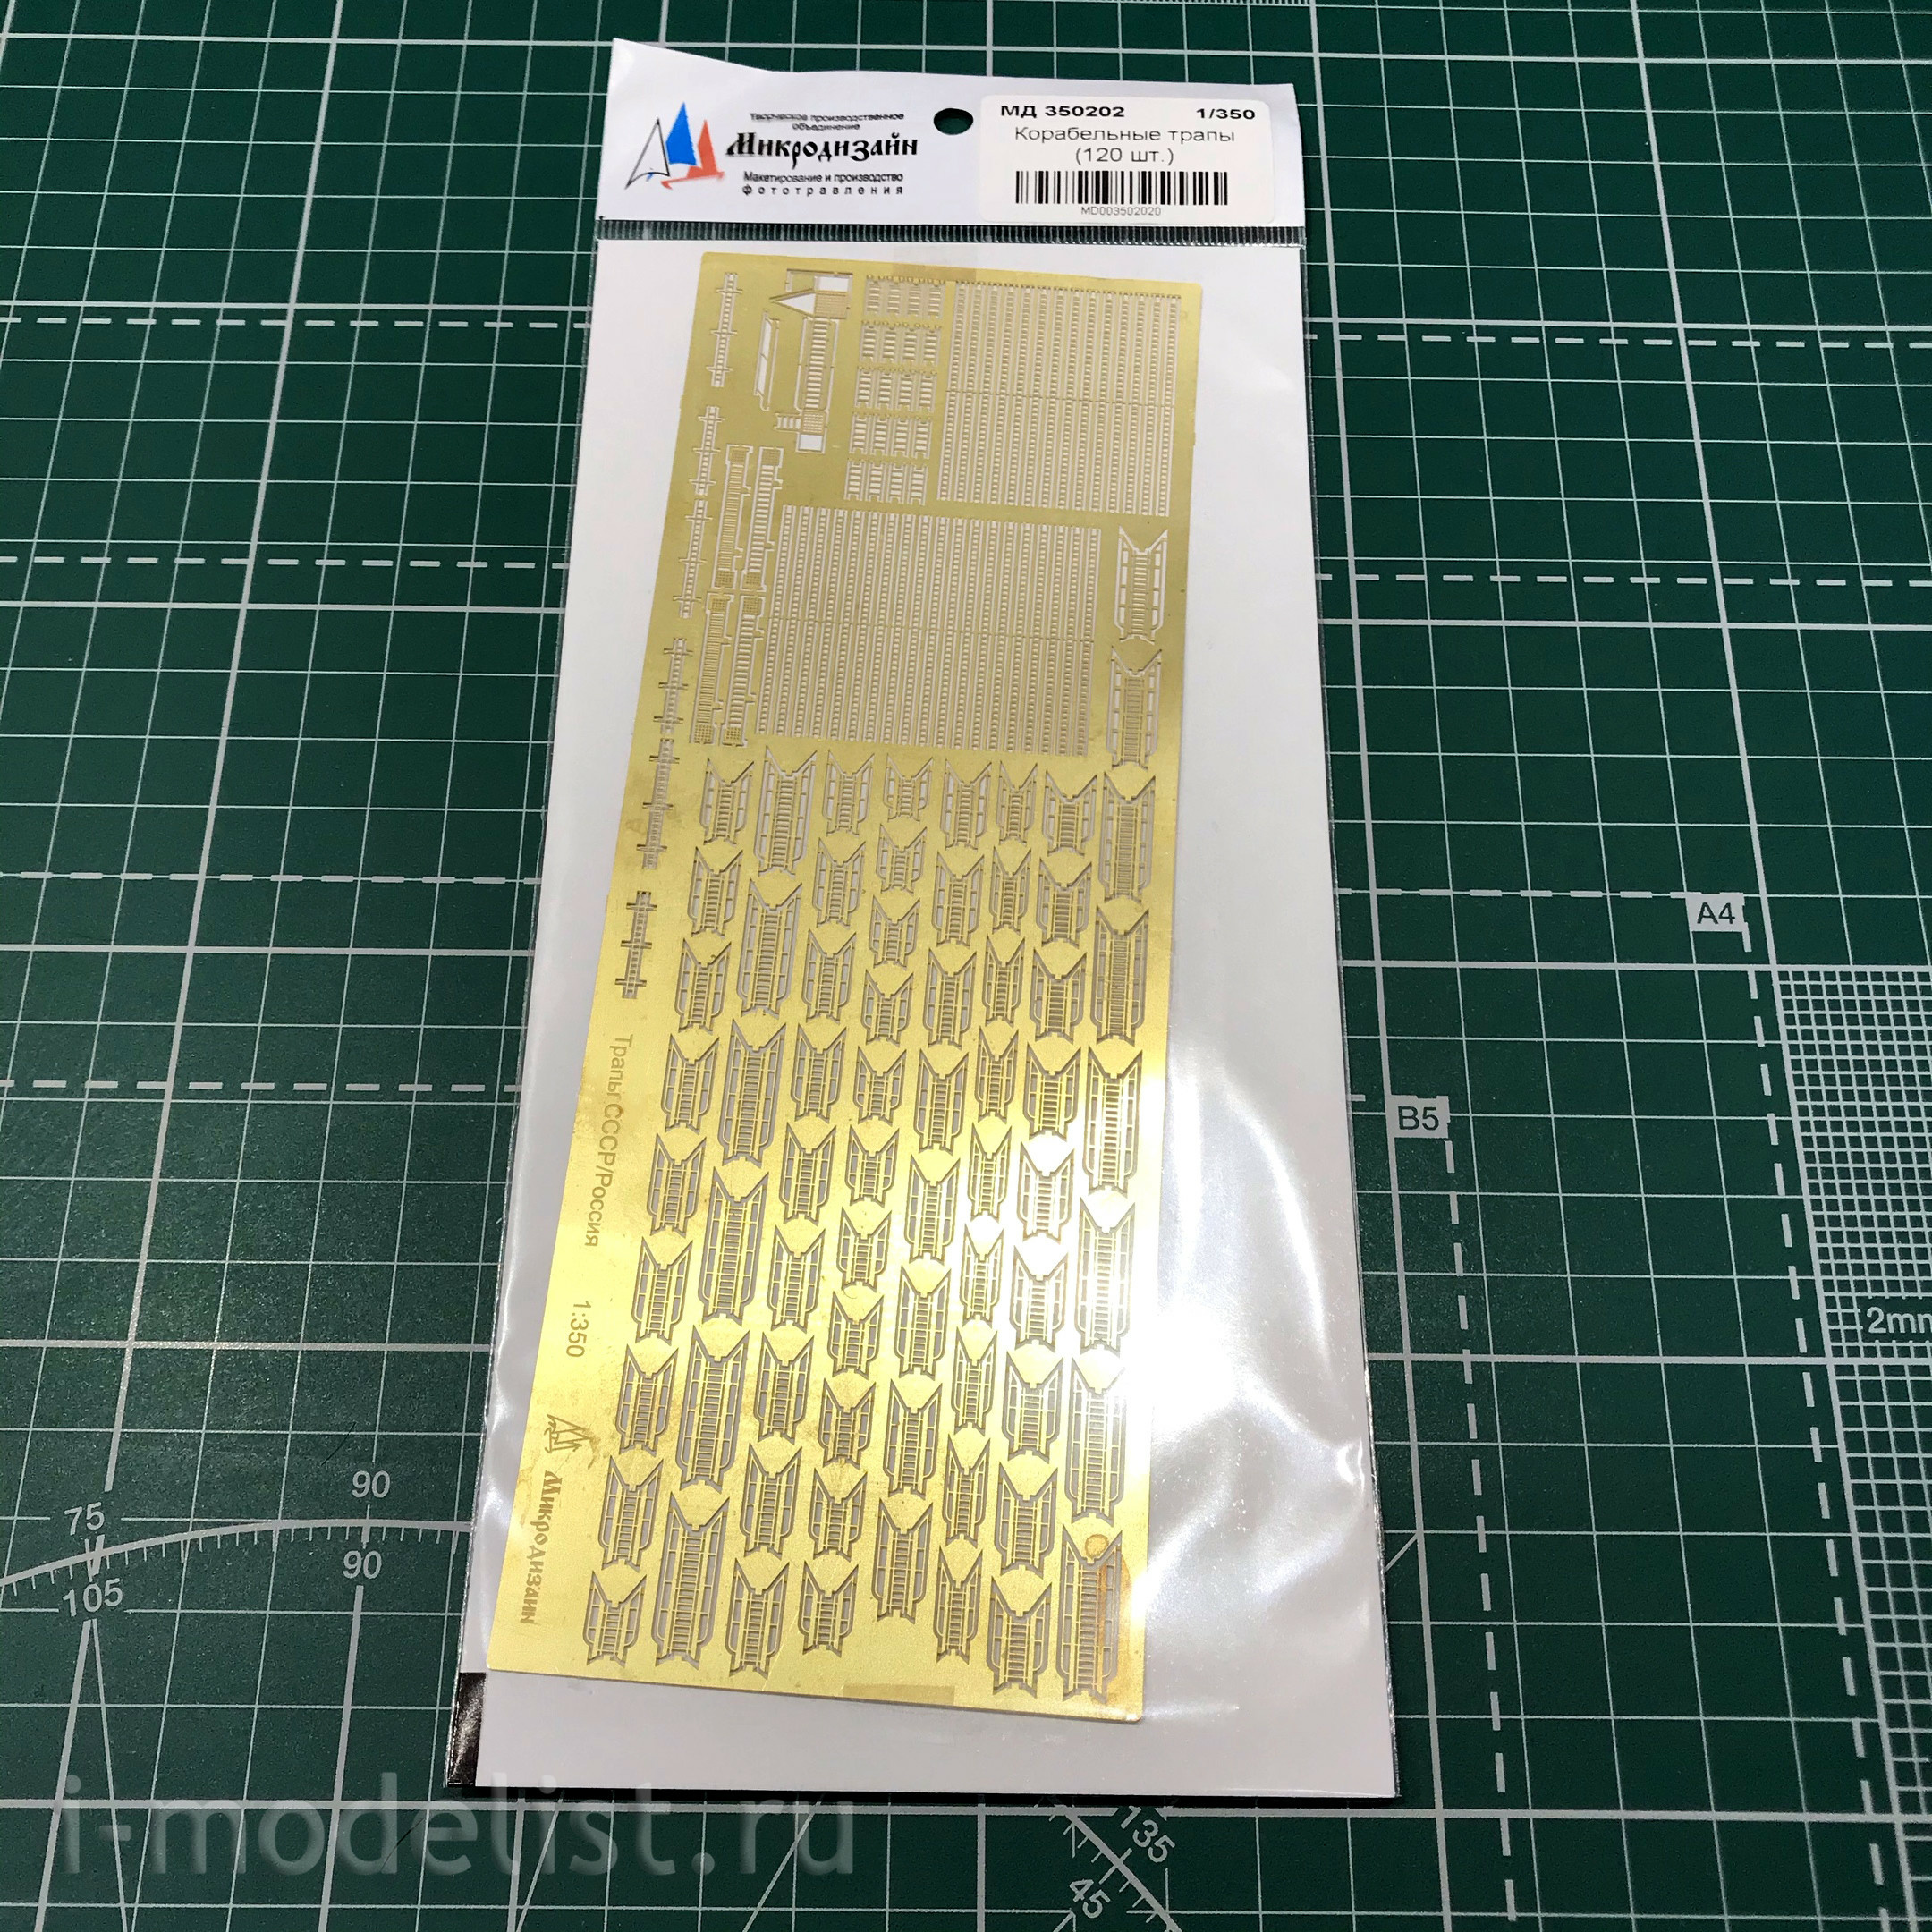 350202 Microdesign 1/350 Ship ladders